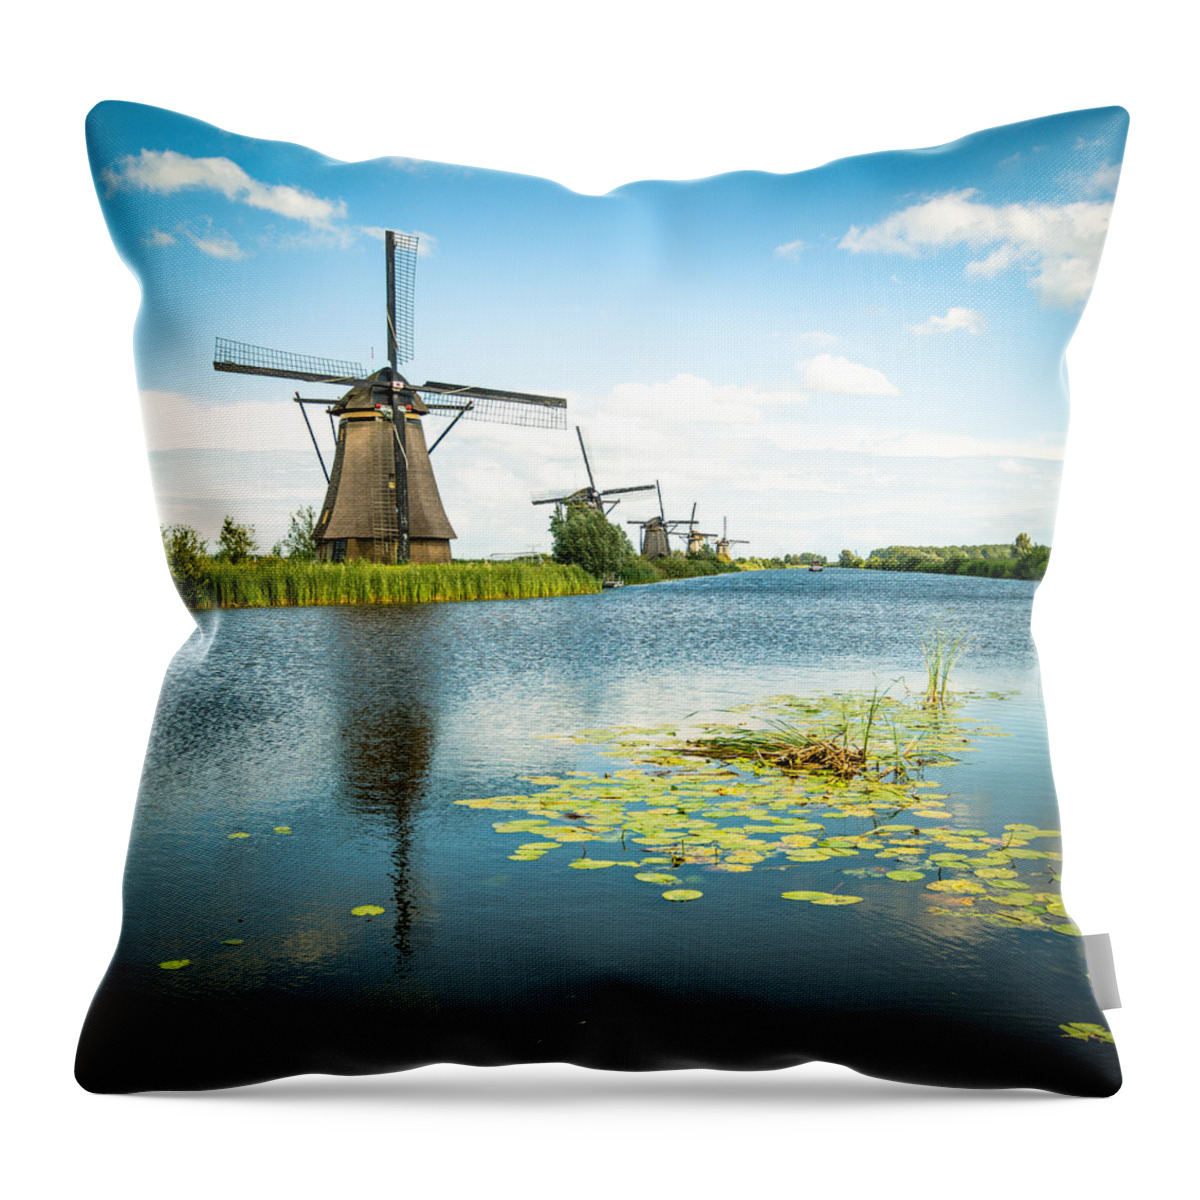 1x1 Throw Pillow featuring the photograph Picturesque Kinderdijk by Hannes Cmarits